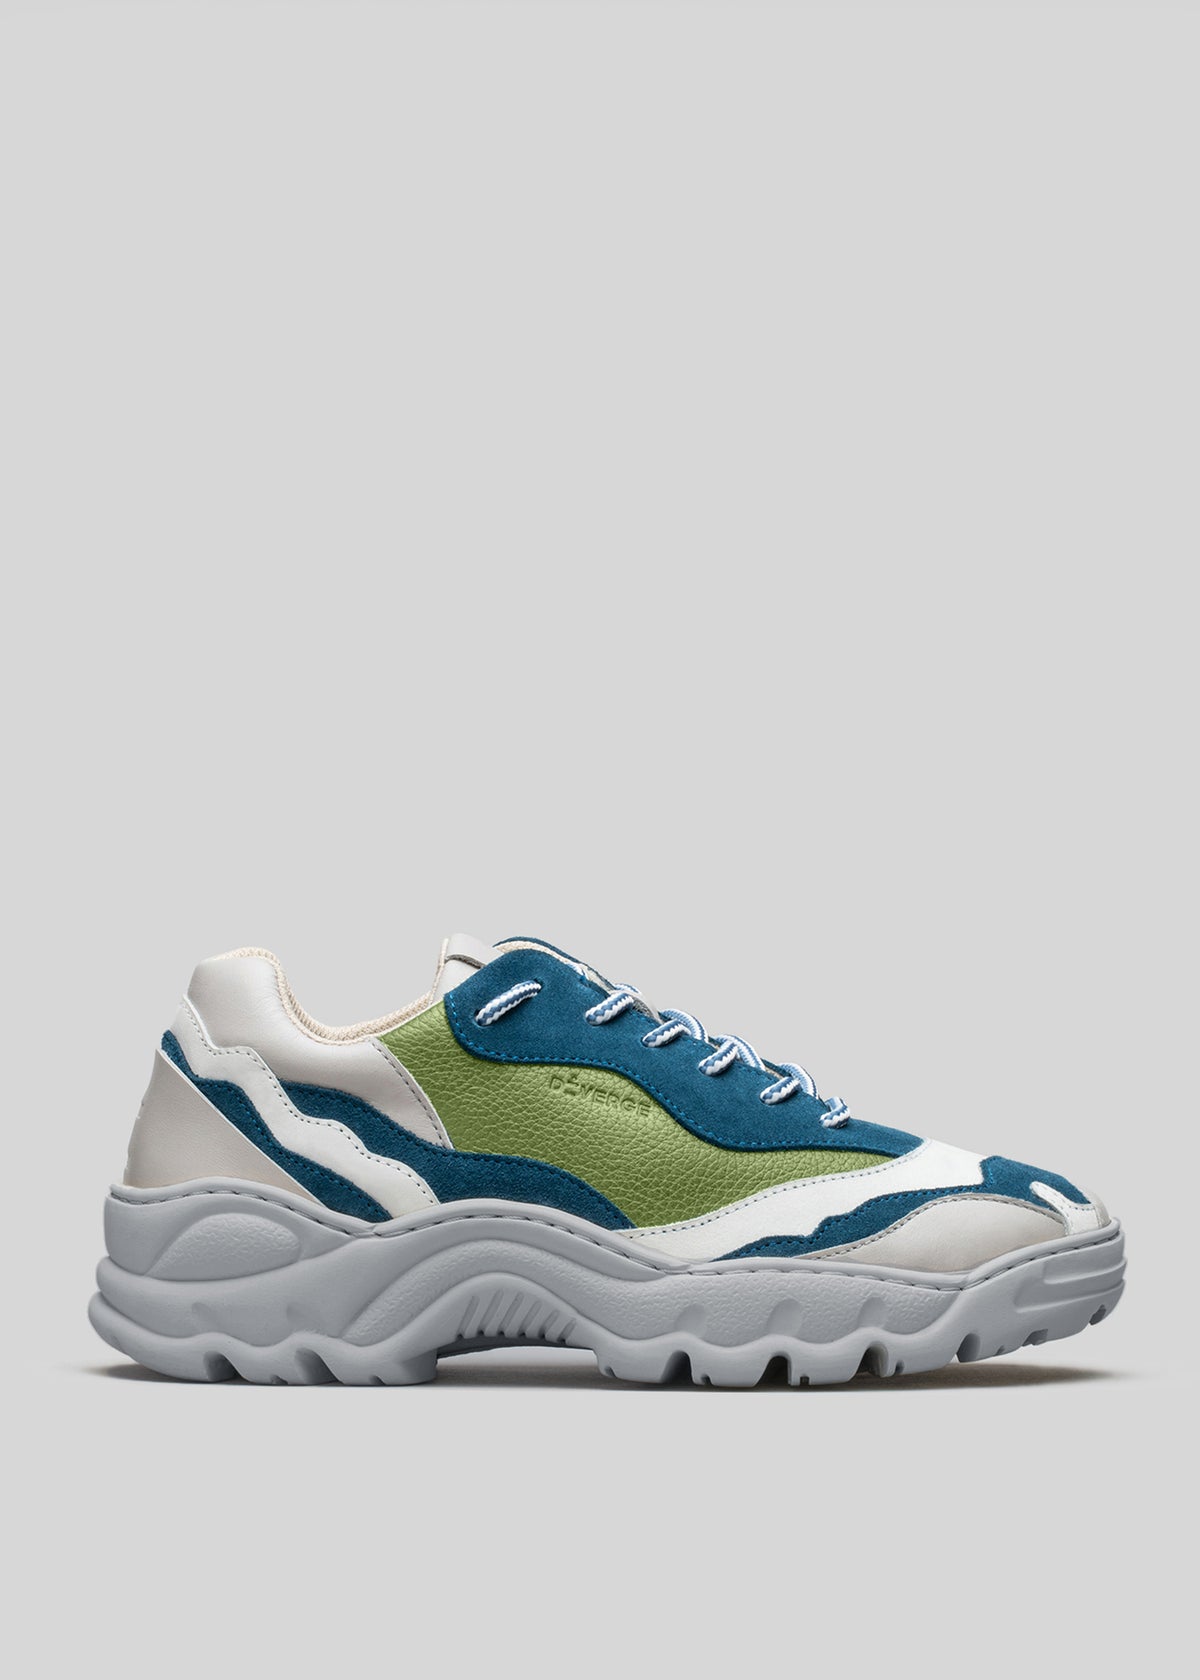 A pair of V16 Leather Color Mix Pine sneakers with white, green, and blue panels and a chunky, wavy sole, displayed against a plain light background.